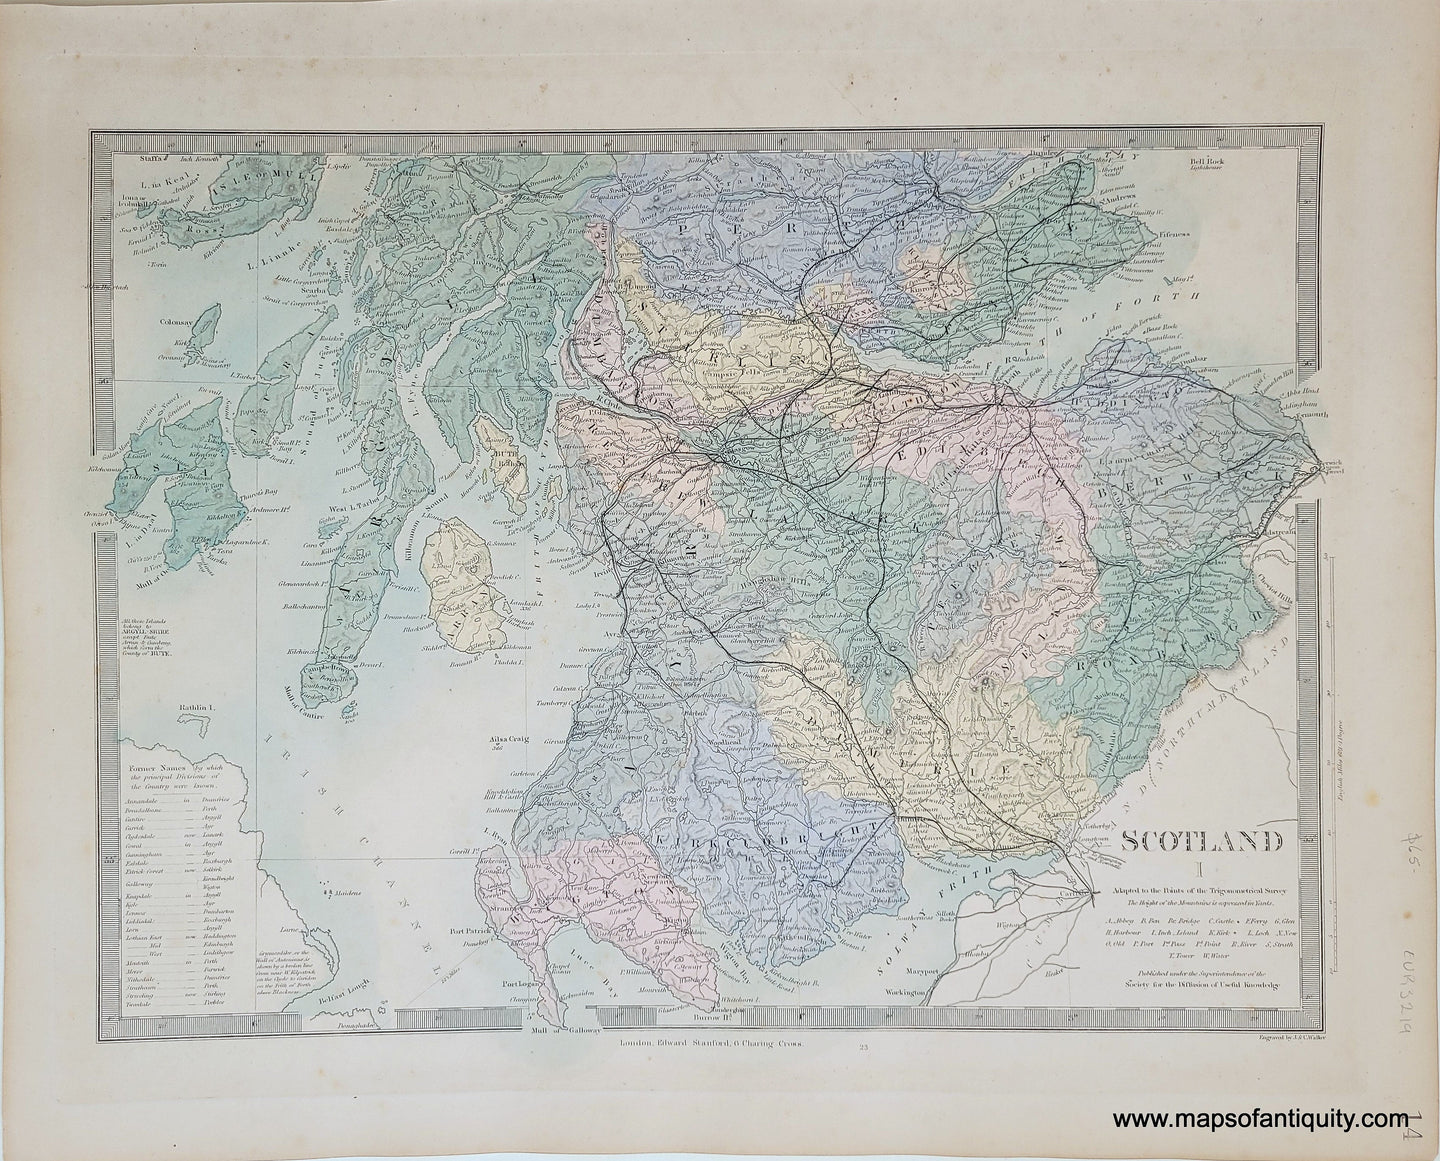 Genuine-Antique-Map-Scotland-I-Scotland--1860-SDUK-Society-for-the-Diffusion-of-Useful-Knowledge-Maps-Of-Antiquity-1800s-19th-century